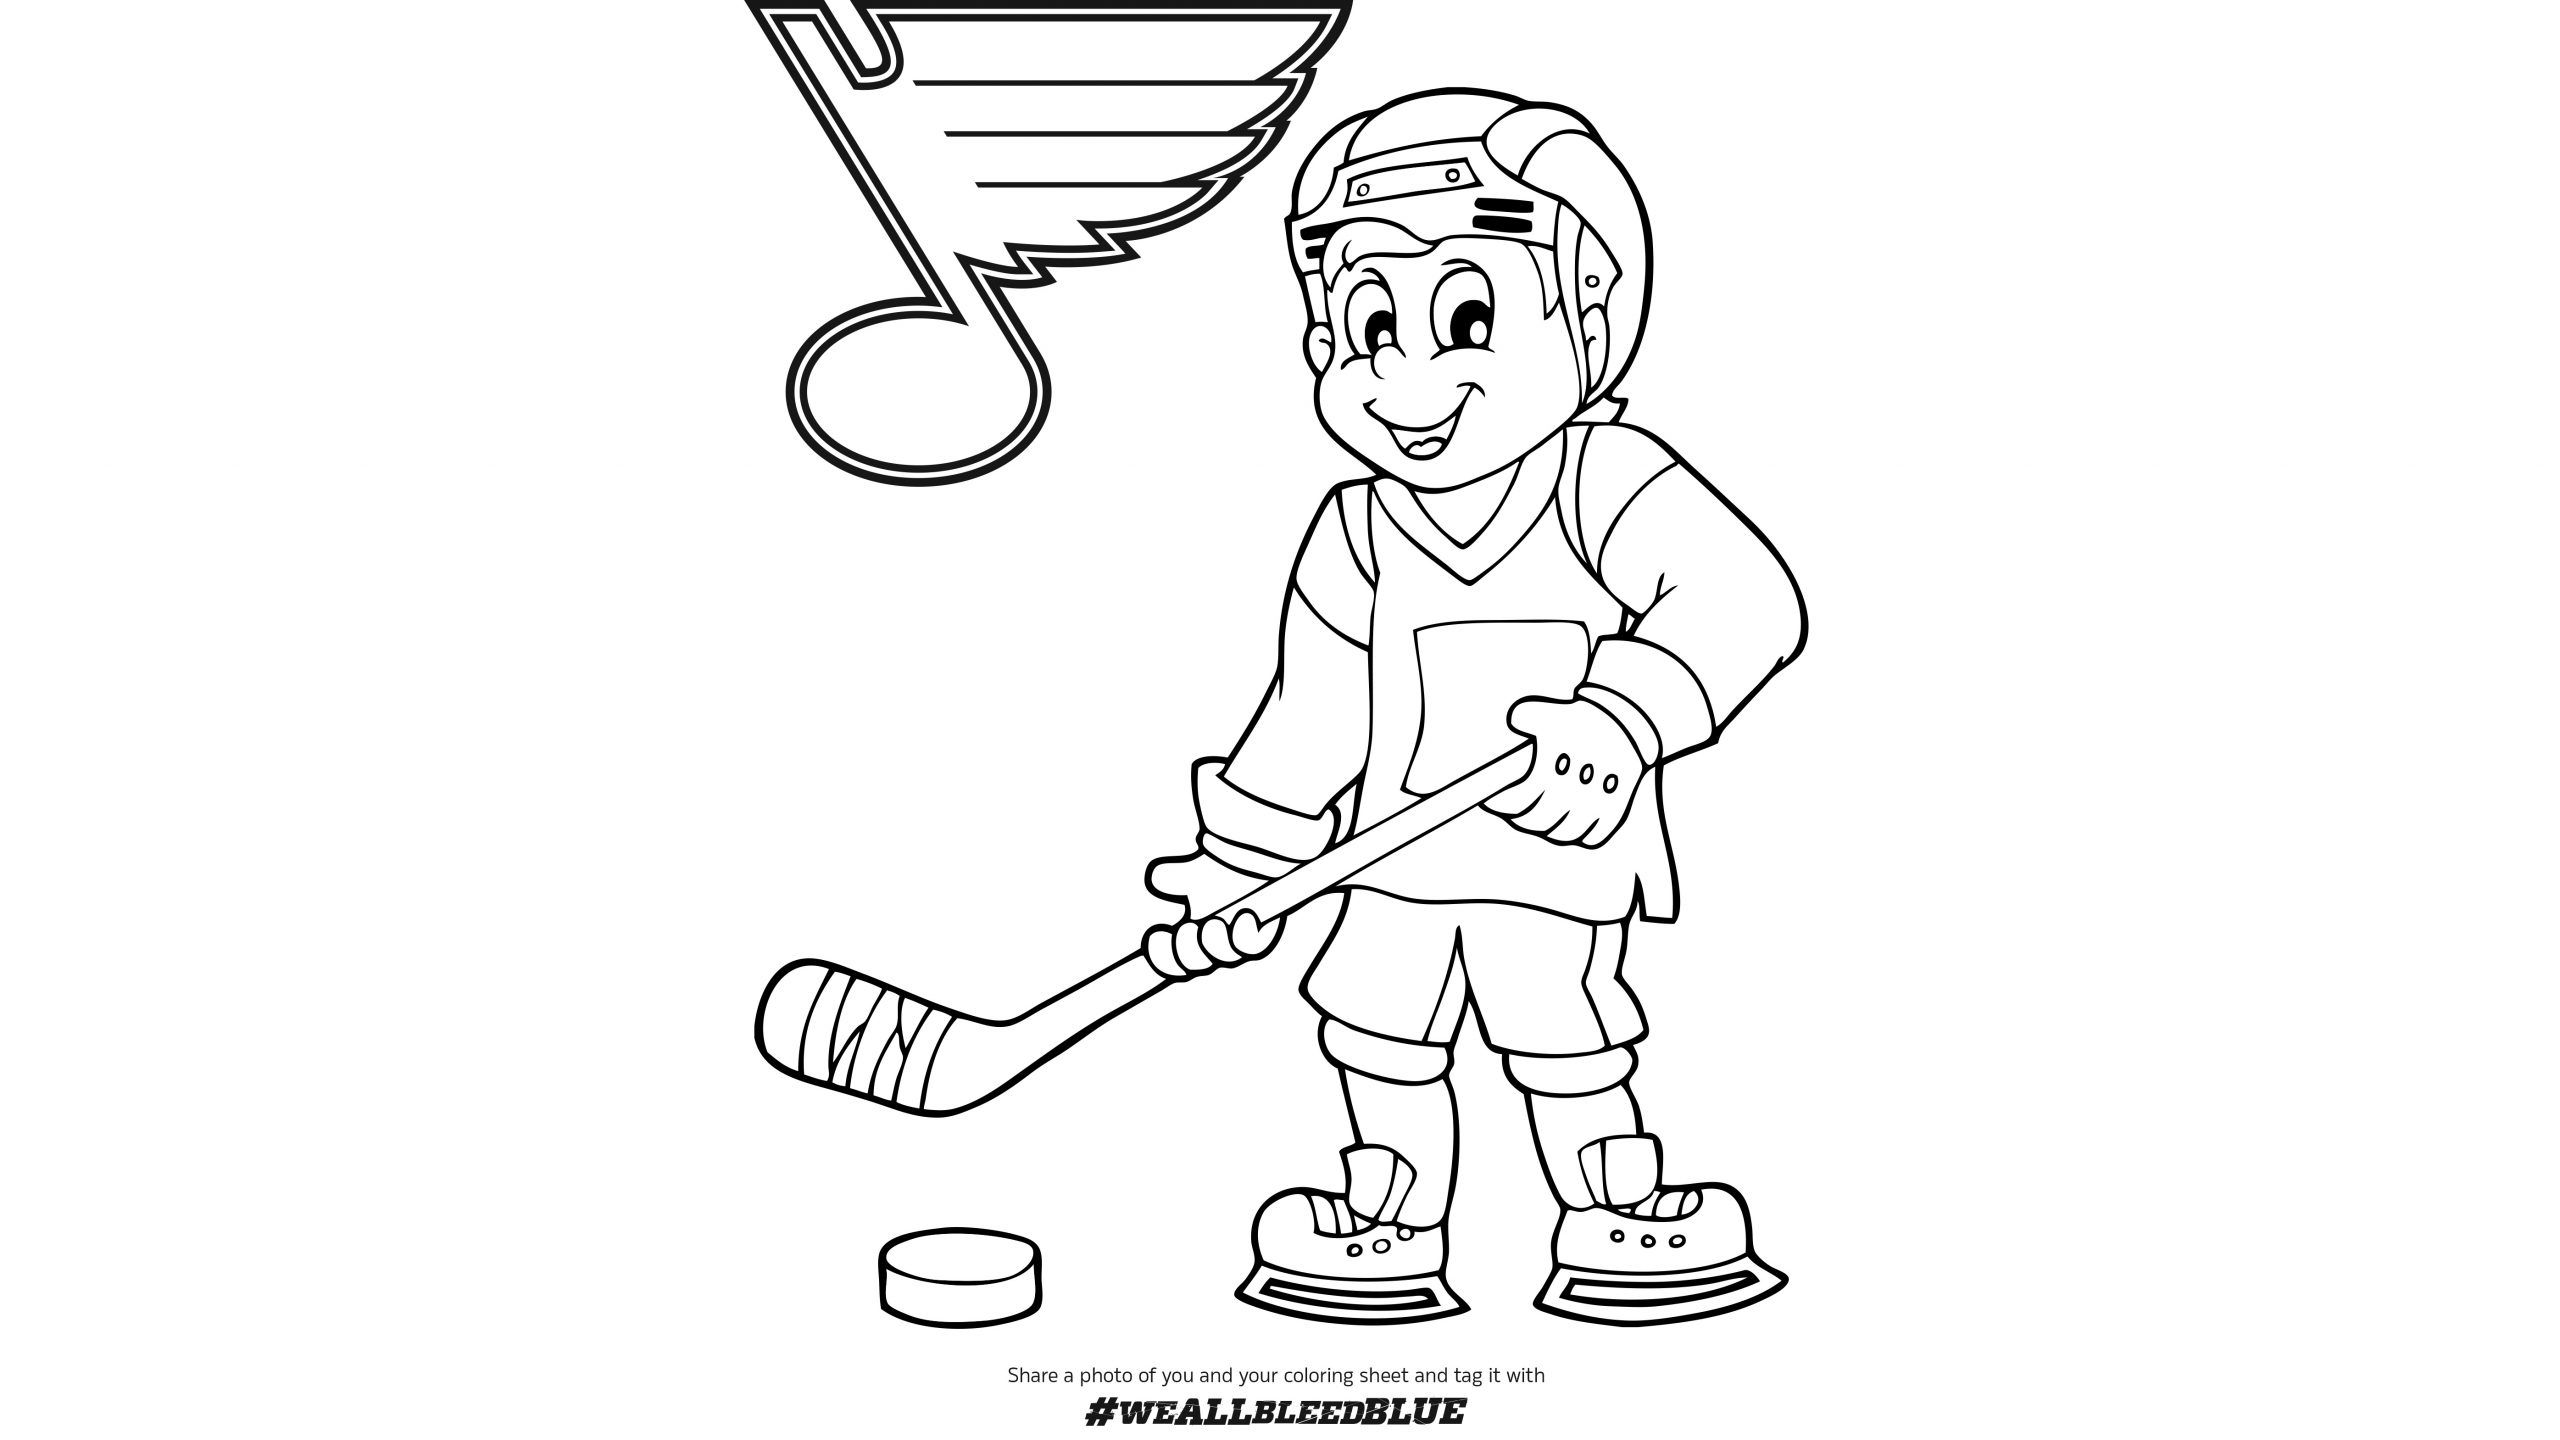 coloring book Coloring Book Hockey Jersey Pages Wallpaper St Louis Blues To Print For Adults Preschoolers Hockey Jersey. For Kids To Print. Free Basketball Jersey